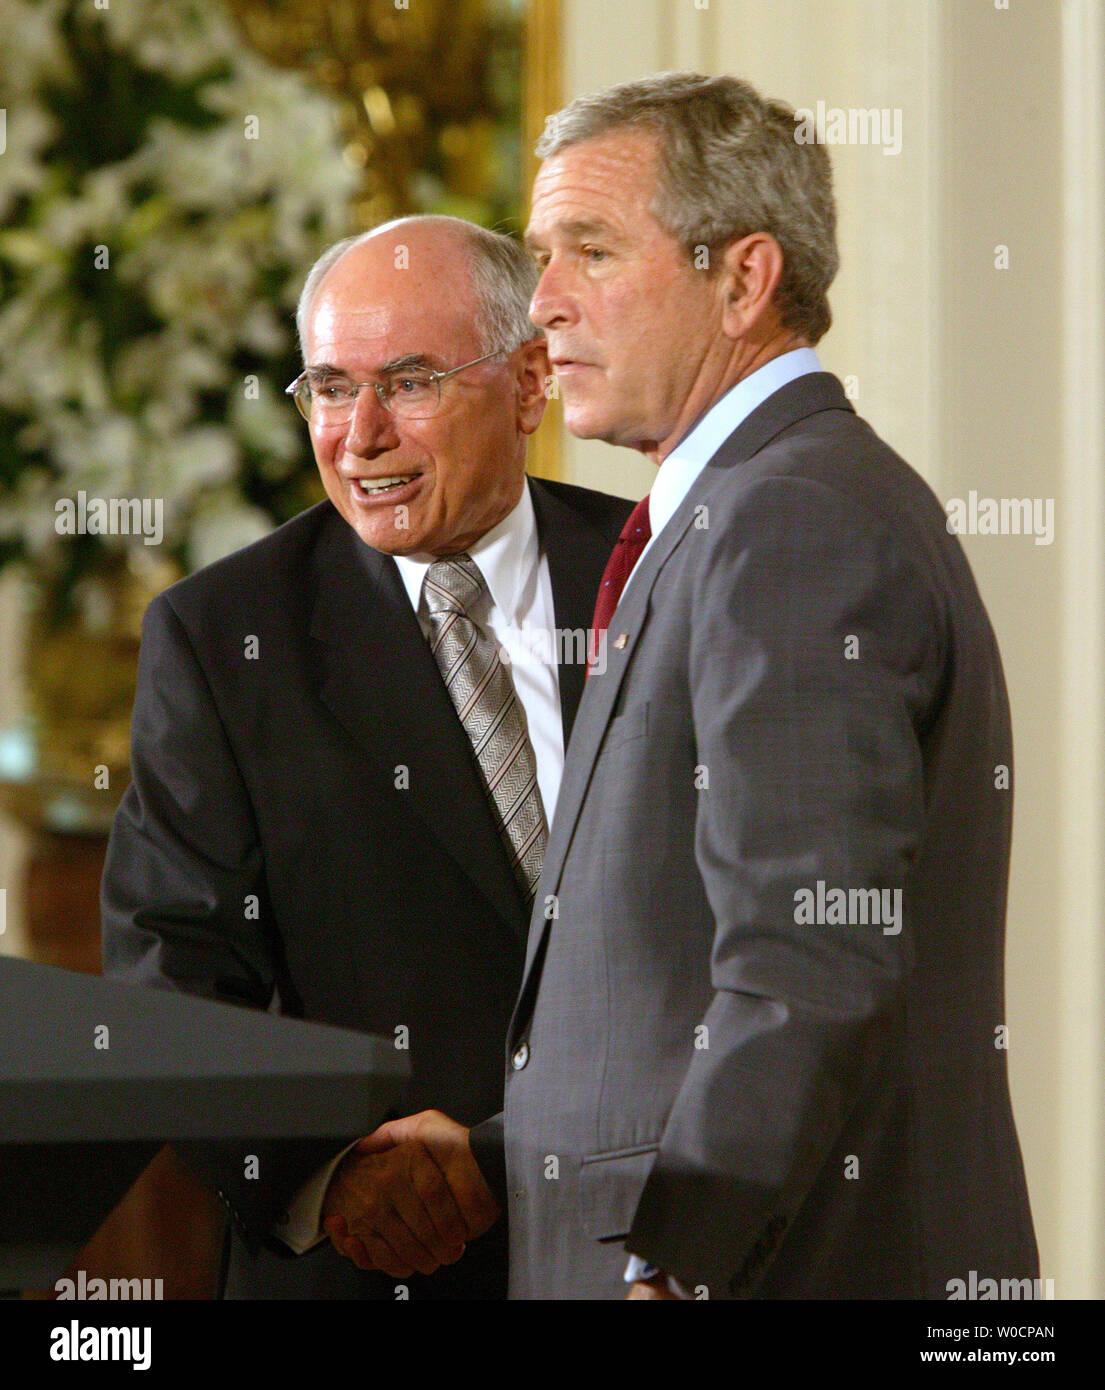 U.S. President George W. Bush and Australian Prime Minister John Howard shake hands after speaking to the media in the East Room of the White House after their meeting on July 19, 2005.   (UPI Photo/Terry Schmitt) Stock Photo